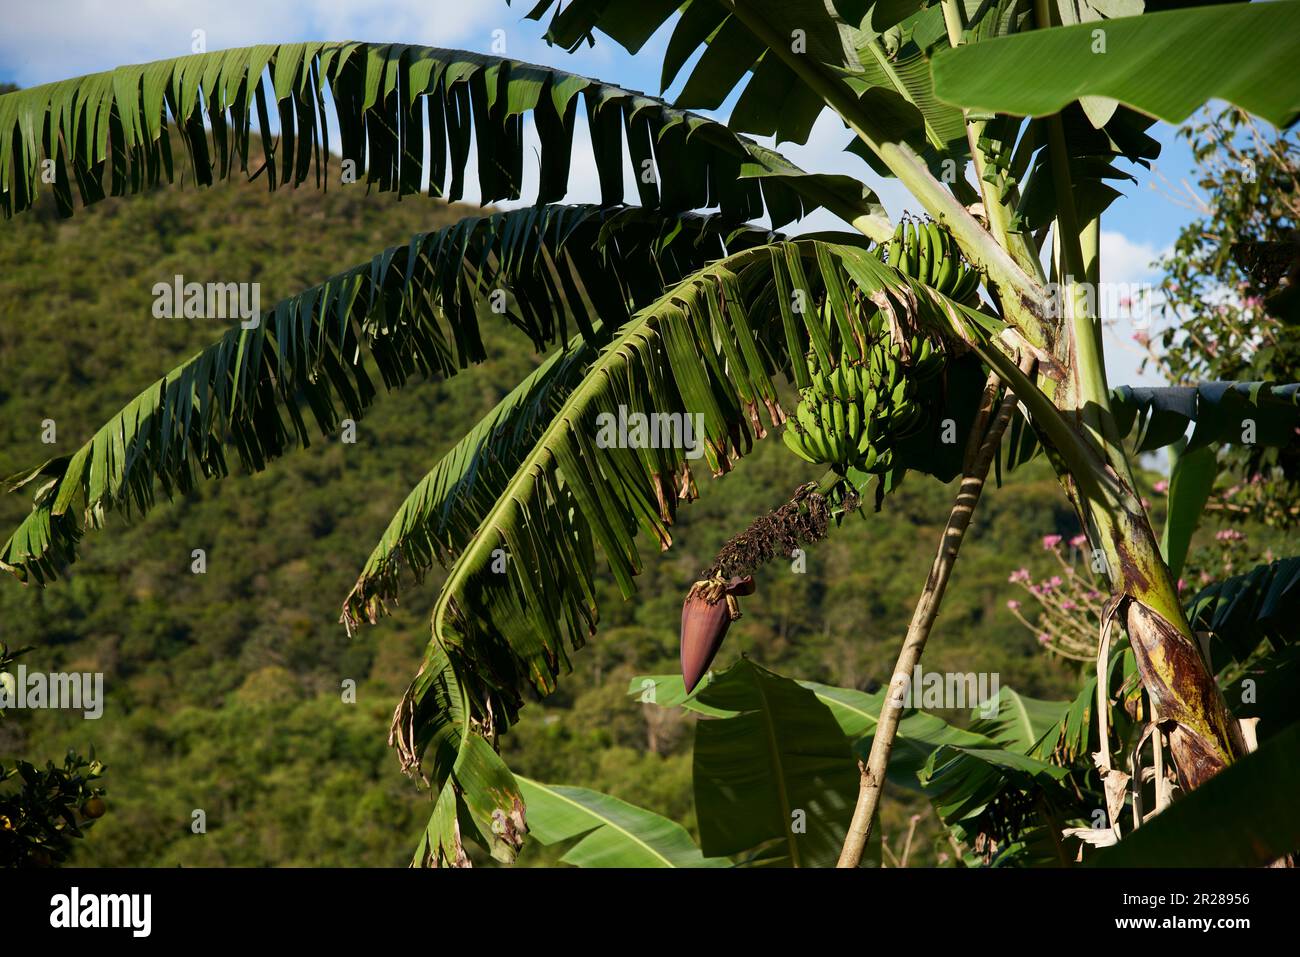 Palm tree with a bunch of green, unripe, bananas hanging, with the flower at the end of the cluster. Plantation in Santander, Colombia. Stock Photo